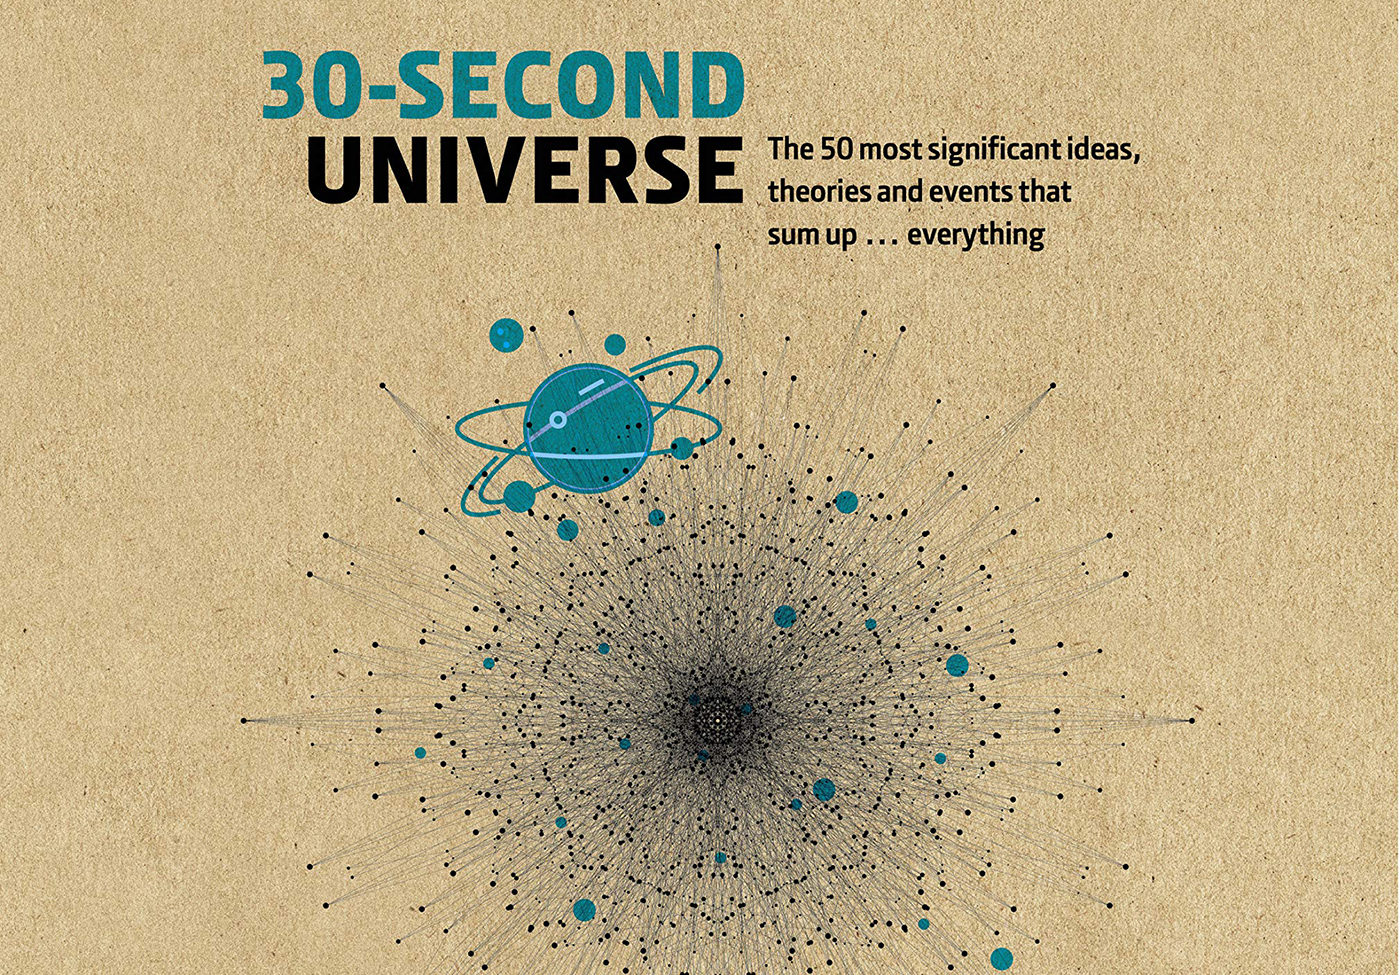 Illustration from the cover of 30-Second Universe: 50 most significant ideas, theories, principles and events that sum up... everything, by Charles Liu, Karen Masters, and Sevil Salur.